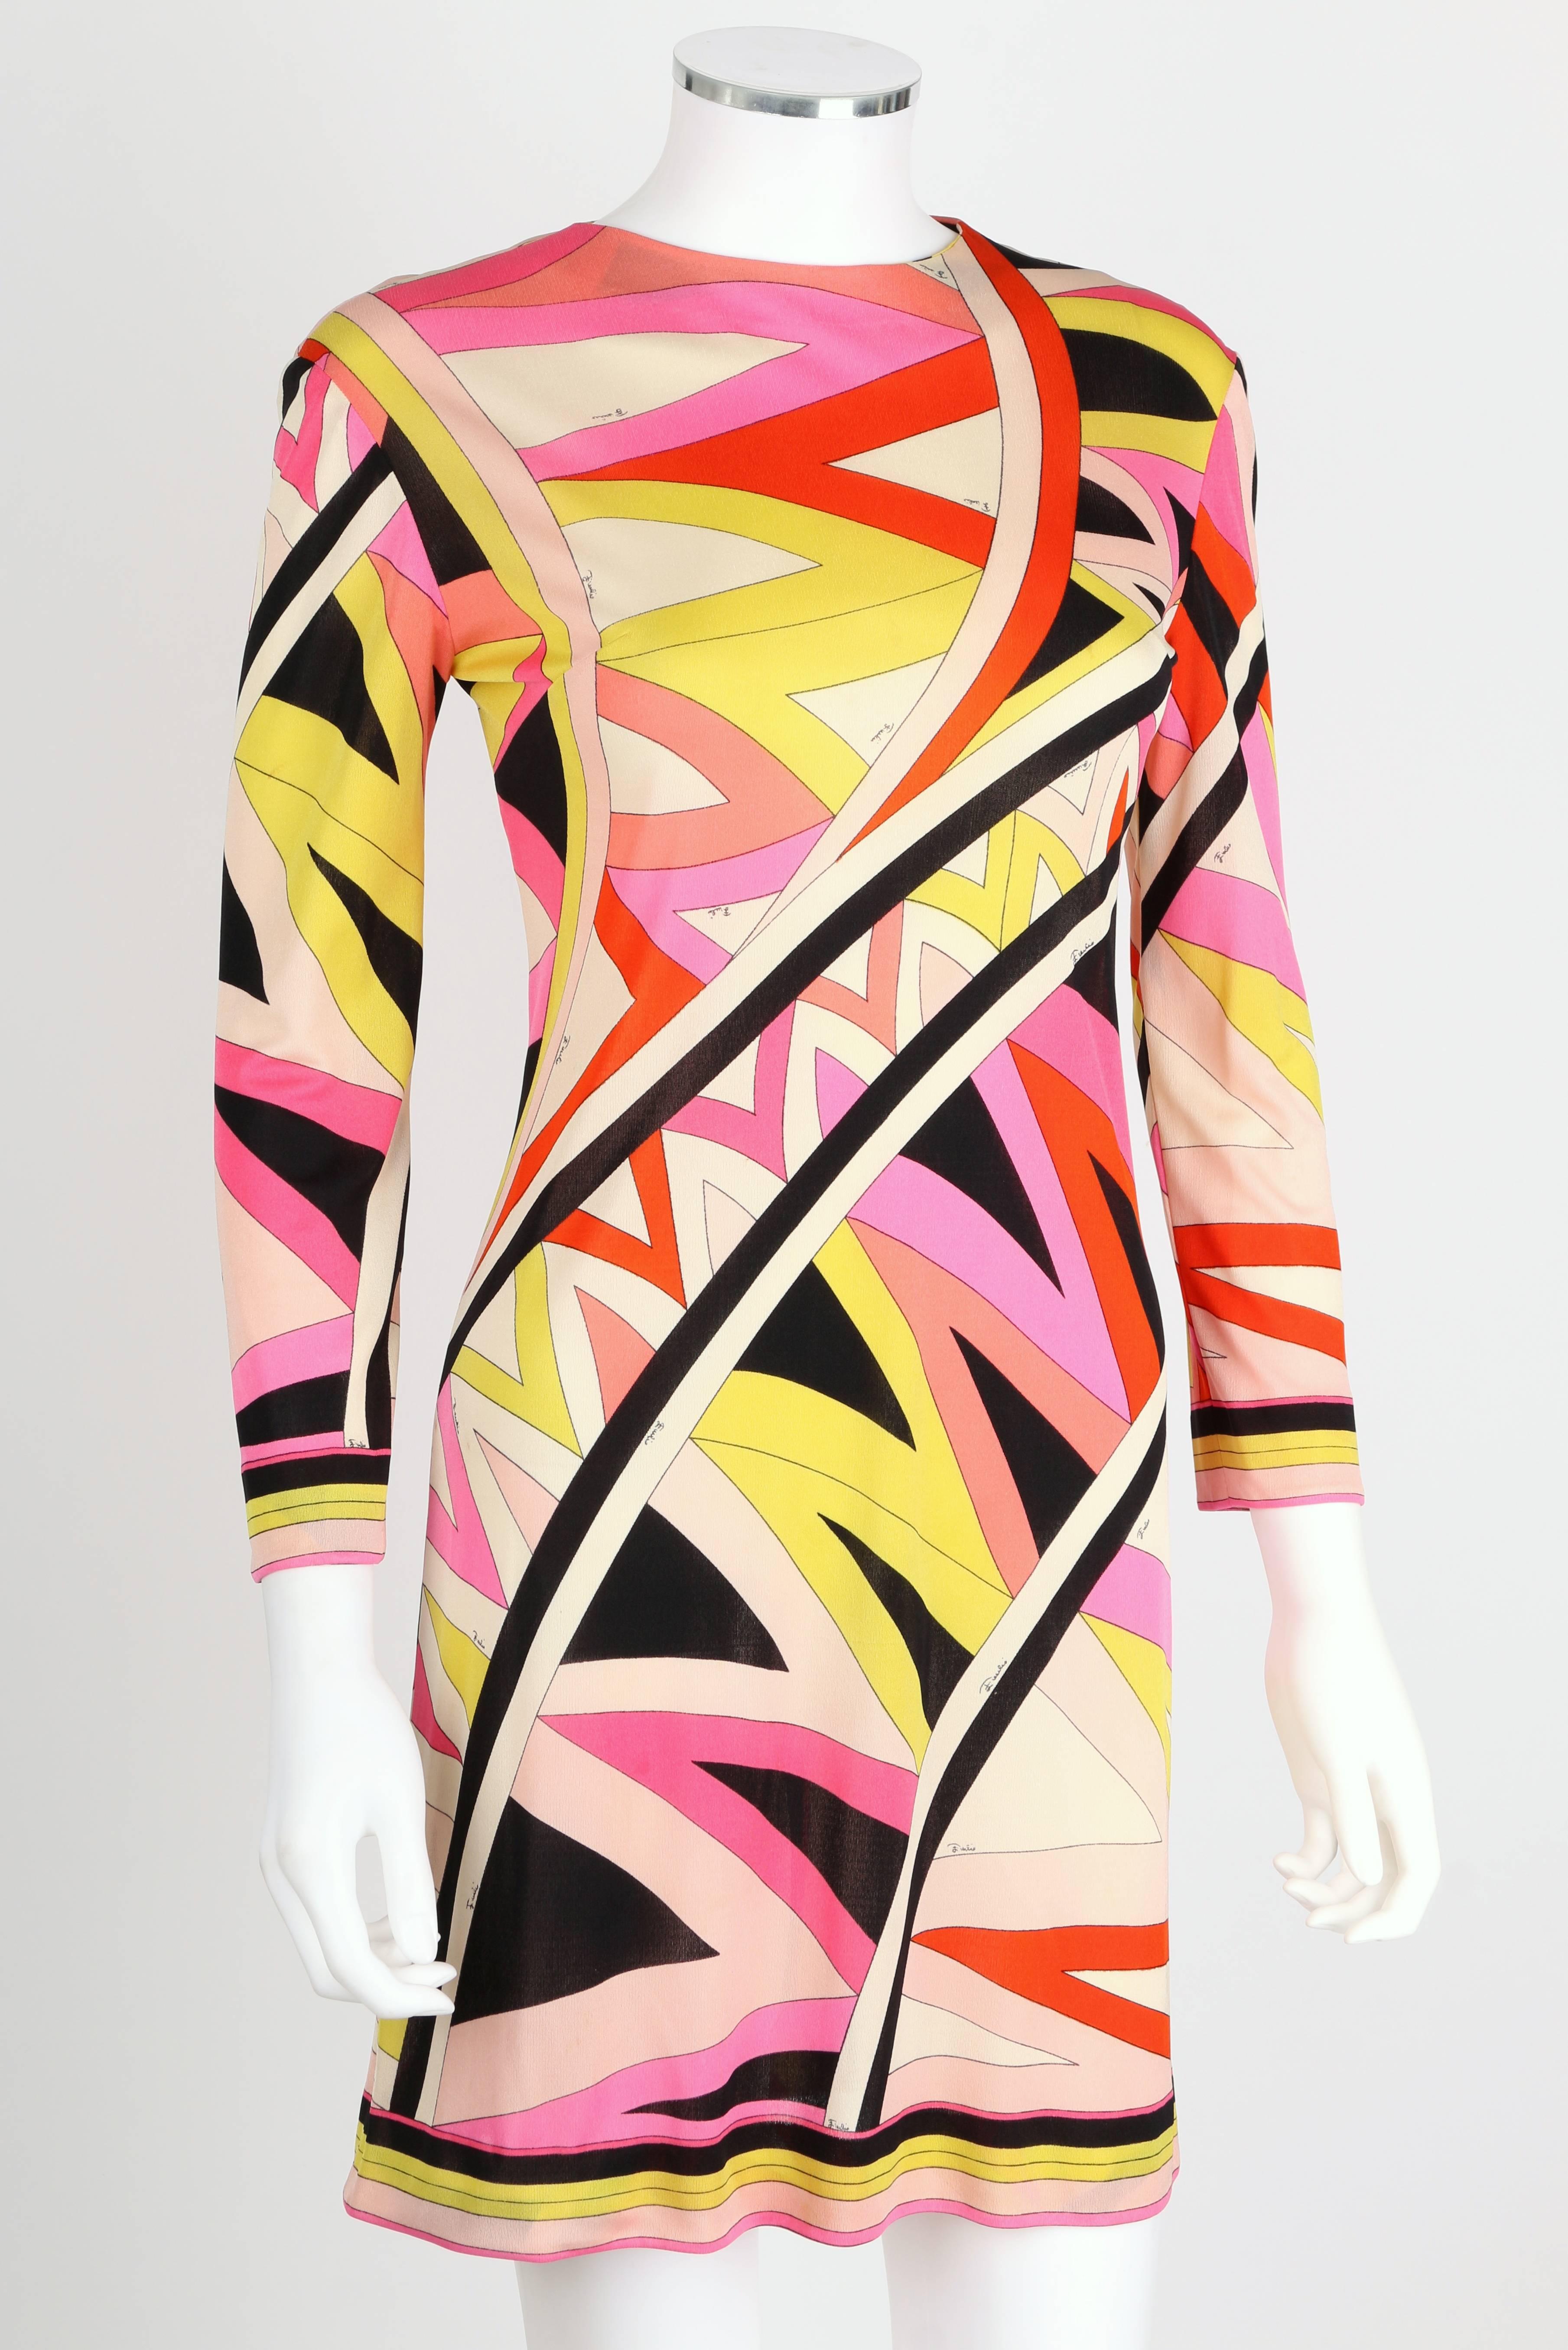 Vintage 1960s Emilio Pucci silk jersey shift dress. All over multi-color signature print. High rounded neckline. Wrist length sleeves. Zips at center back. Marked Fabric Content:  